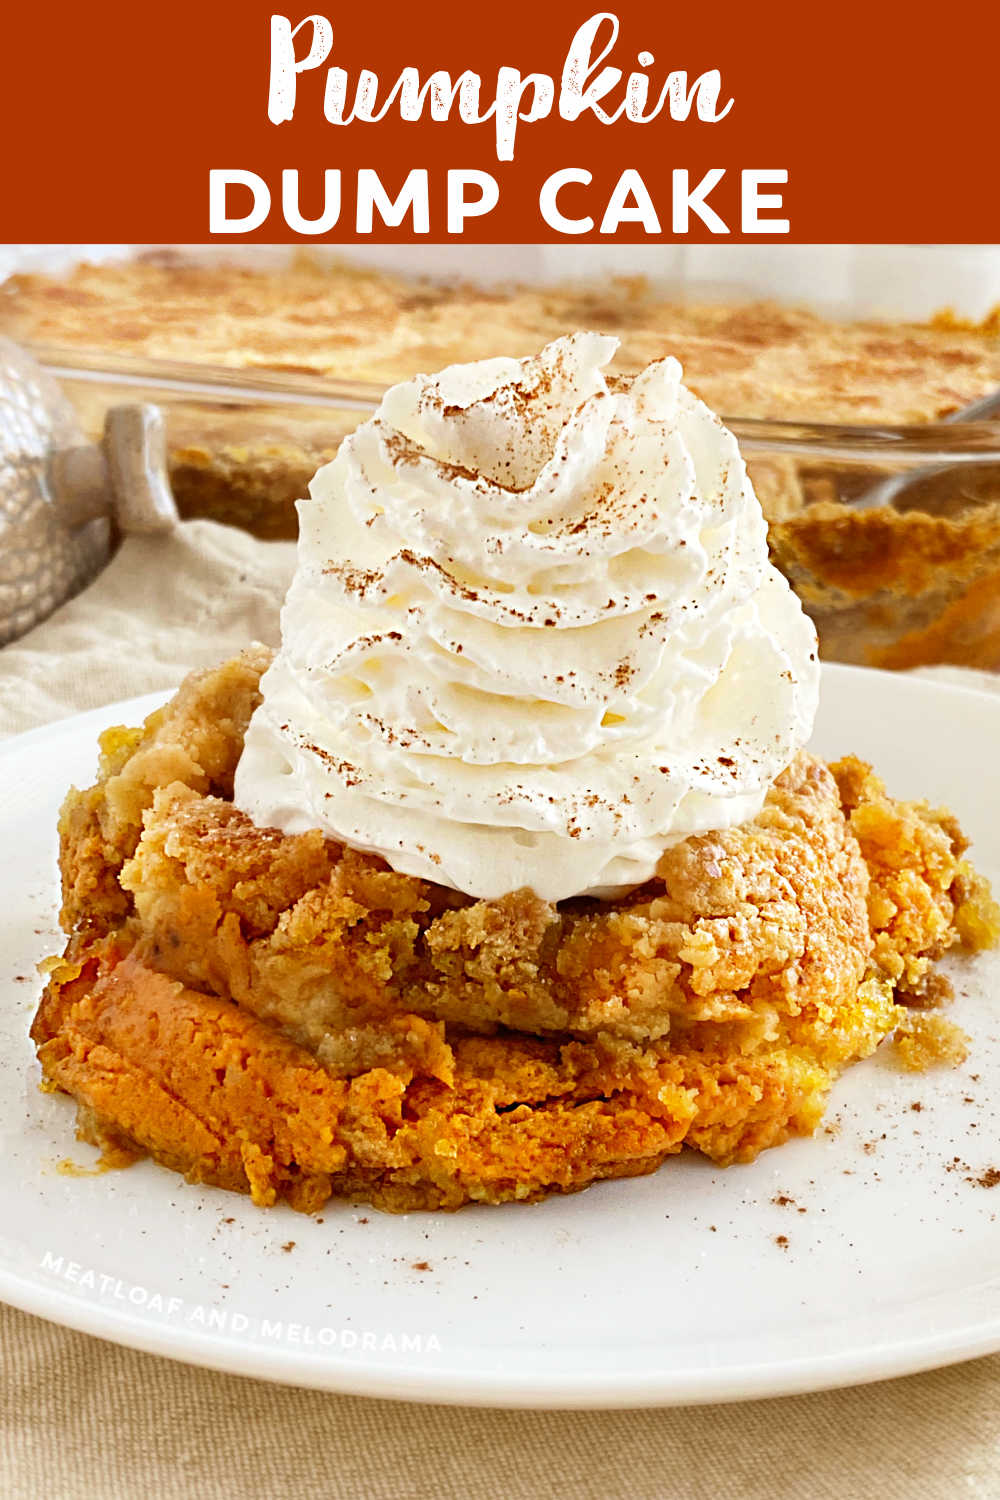 This Easy Pumpkin Dump Cake Recipe made with canned pumpkin and yellow cake mix is one of the easiest pumpkin desserts ever. This easy recipe is sure to be a family favorite, and it's perfect for fall gatherings and Thanksgiving! via @meamel